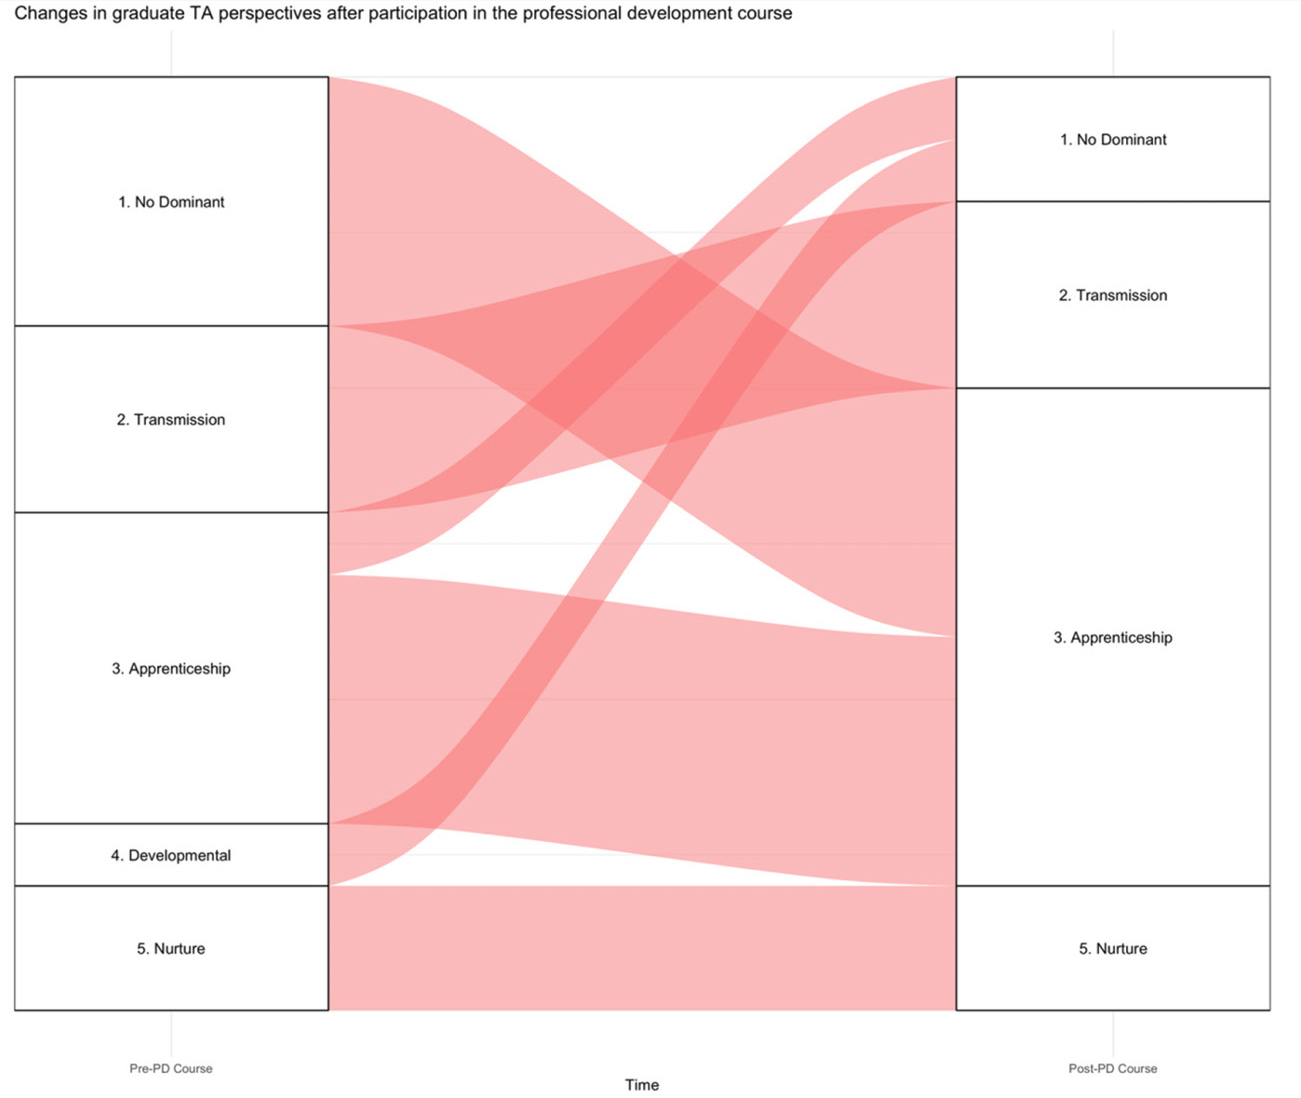 Figure 2 Changes in graduate TA perspectives after participation in the professional development course.